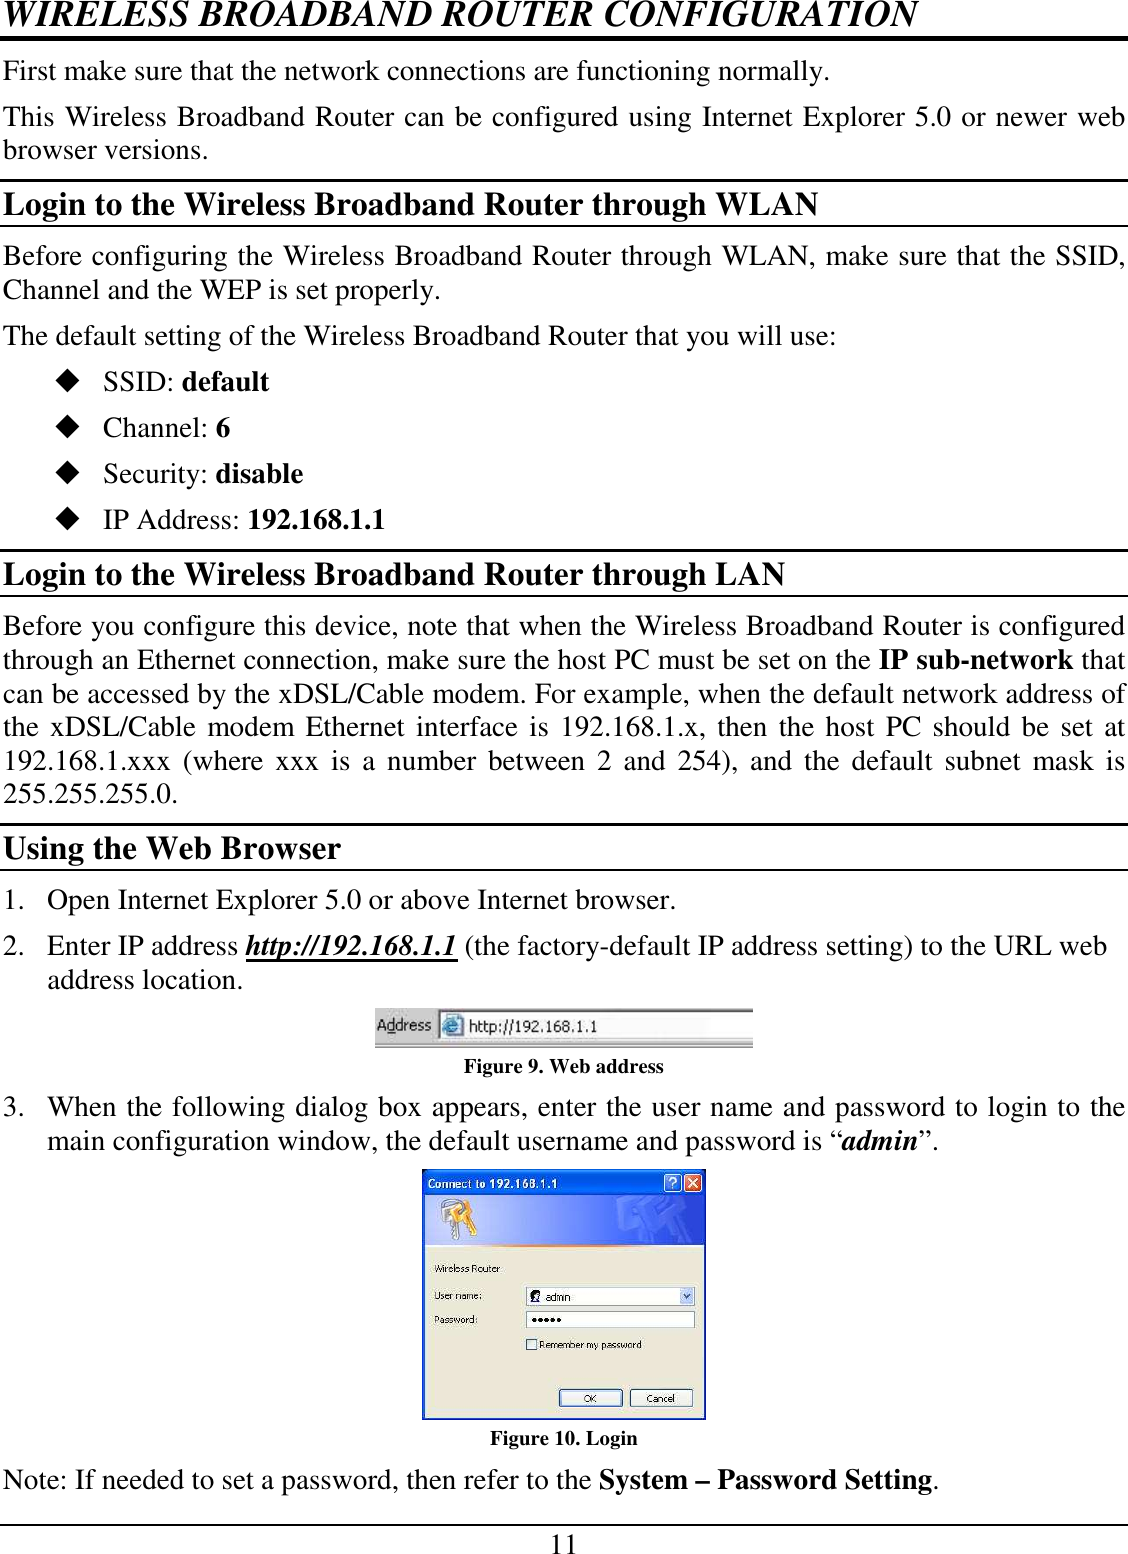 11 WIRELESS BROADBAND ROUTER CONFIGURATION First make sure that the network connections are functioning normally.  This Wireless Broadband Router can be configured using Internet Explorer 5.0 or newer web browser versions. Login to the Wireless Broadband Router through WLAN Before configuring the Wireless Broadband Router through WLAN, make sure that the SSID, Channel and the WEP is set properly. The default setting of the Wireless Broadband Router that you will use:  SSID: default  Channel: 6  Security: disable  IP Address: 192.168.1.1 Login to the Wireless Broadband Router through LAN Before you configure this device, note that when the Wireless Broadband Router is configured through an Ethernet connection, make sure the host PC must be set on the IP sub-network that can be accessed by the xDSL/Cable modem. For example, when the default network address of the xDSL/Cable modem Ethernet interface is 192.168.1.x, then the host PC should be set at 192.168.1.xxx (where  xxx  is  a  number between  2  and  254),  and  the  default  subnet  mask  is 255.255.255.0. Using the Web Browser 1. Open Internet Explorer 5.0 or above Internet browser. 2. Enter IP address http://192.168.1.1 (the factory-default IP address setting) to the URL web address location.  Figure 9. Web address 3. When the following dialog box appears, enter the user name and password to login to the main configuration window, the default username and password is “admin”.  Figure 10. Login Note: If needed to set a password, then refer to the System – Password Setting. 